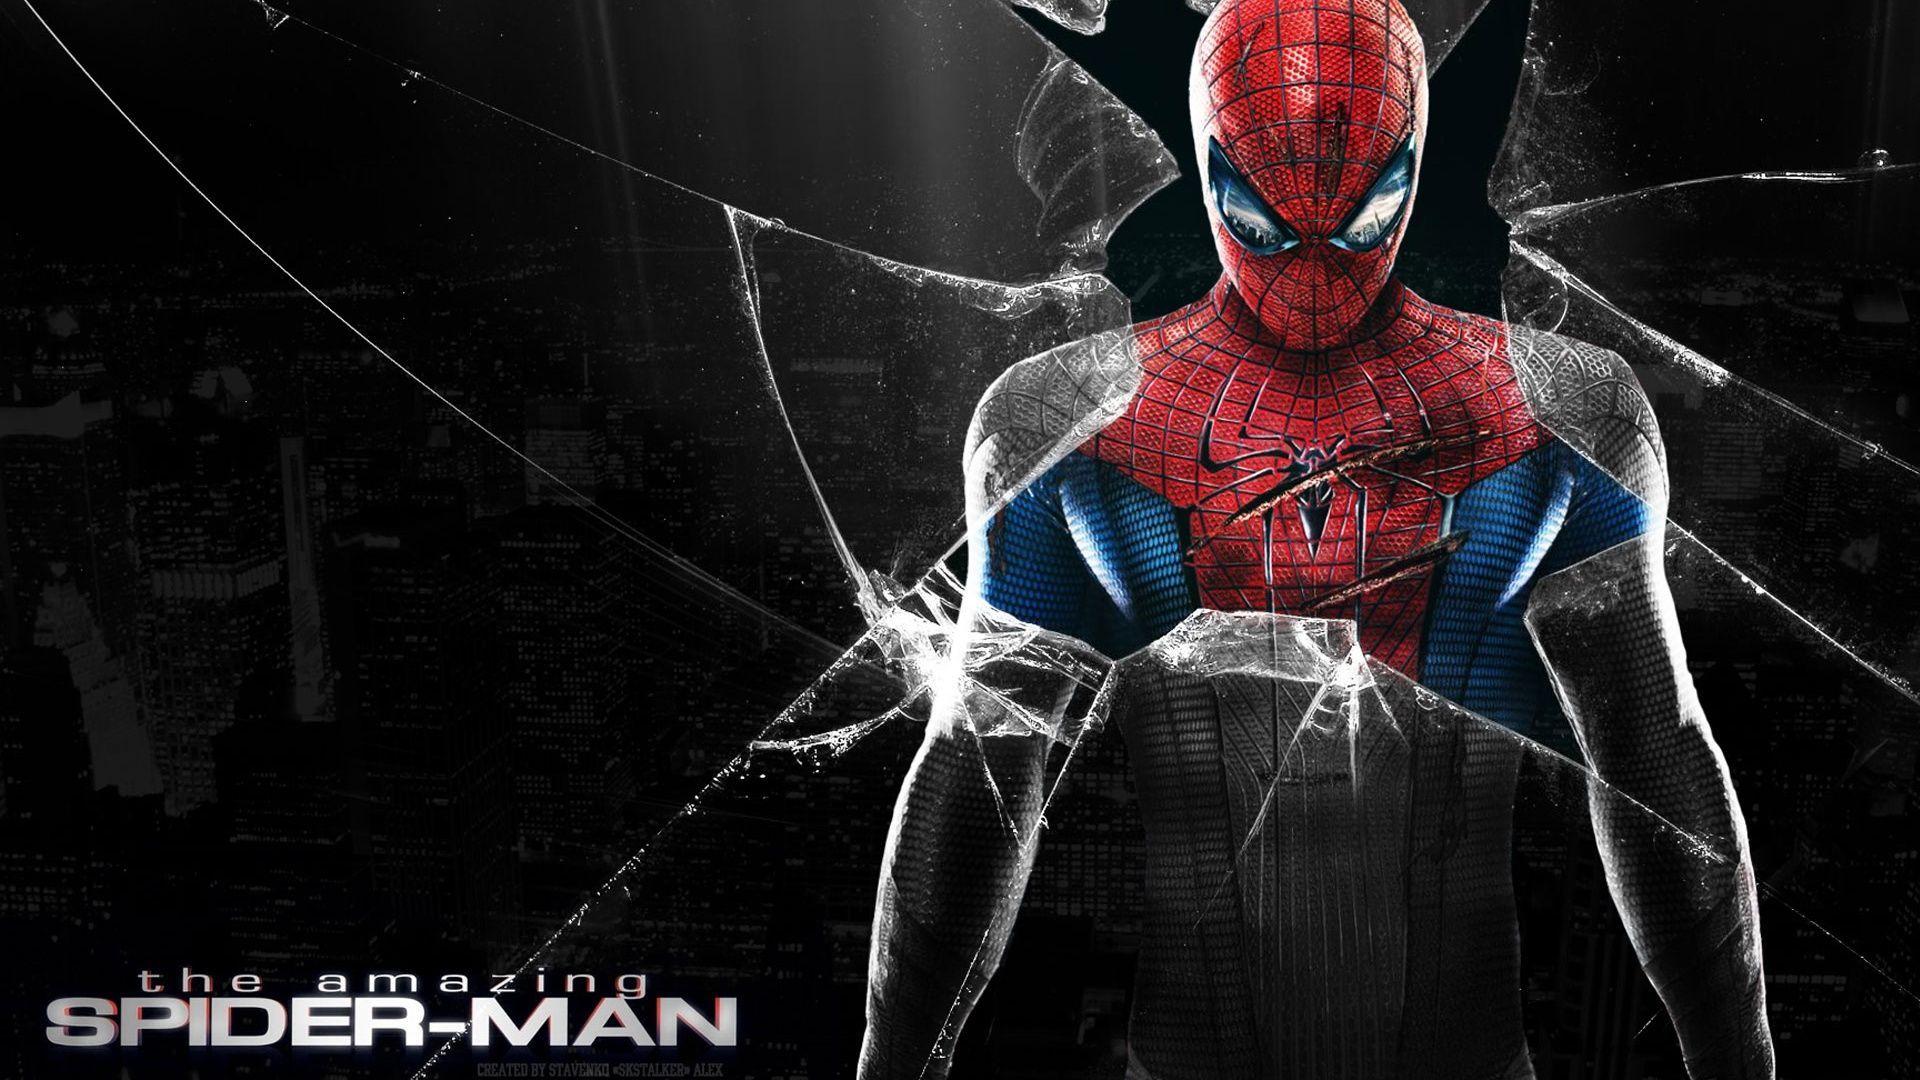 HD The Amazing Spiderman Cracked Screen Wallpaper Full Size. f